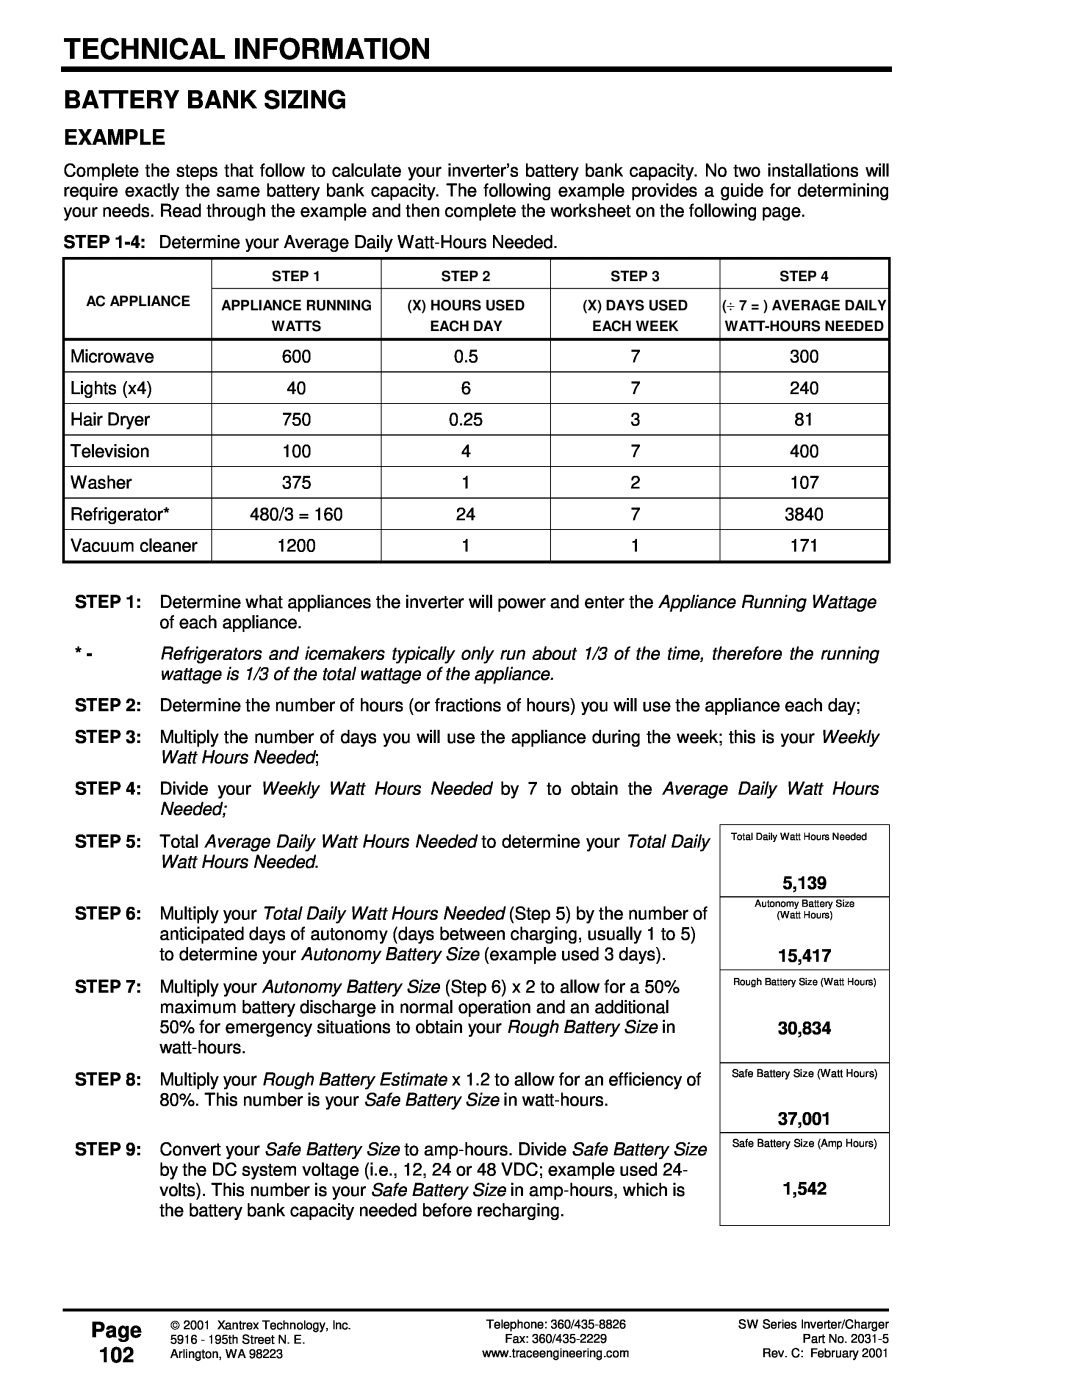 Xantrex Technology SW Series owner manual Battery Bank Sizing, Example, Page 102, 5,139, 15,417, 30,834, 37,001, 1,542 